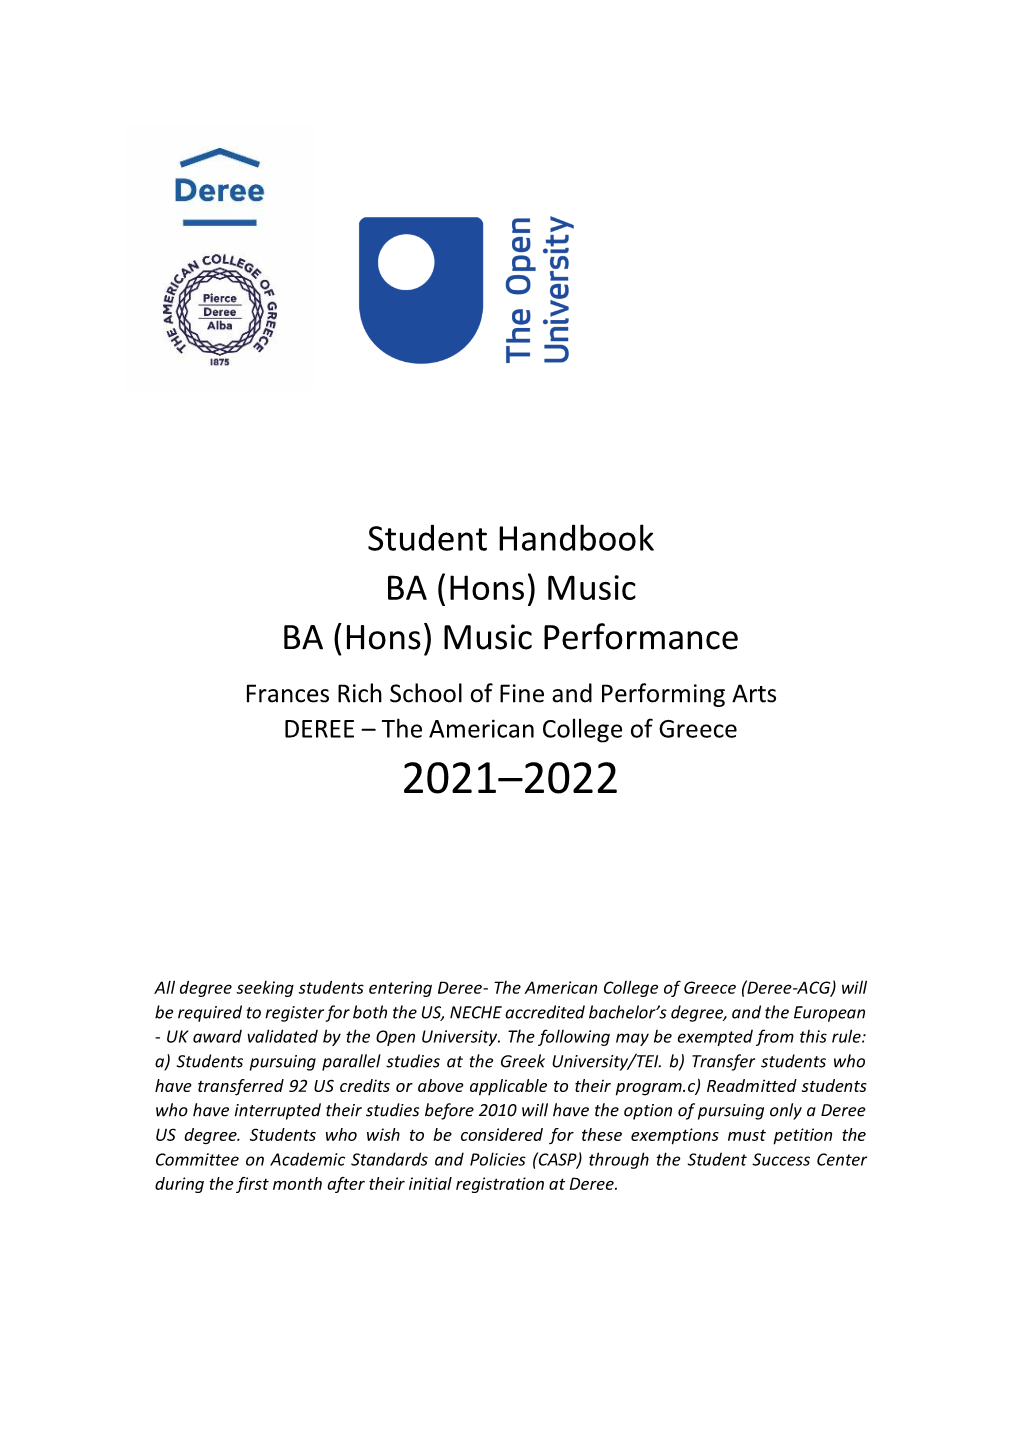 Student Handbook BA (Hons) Music BA (Hons) Music Performance Frances Rich School of Fine and Performing Arts DEREE – the American College of Greece 2021–2022